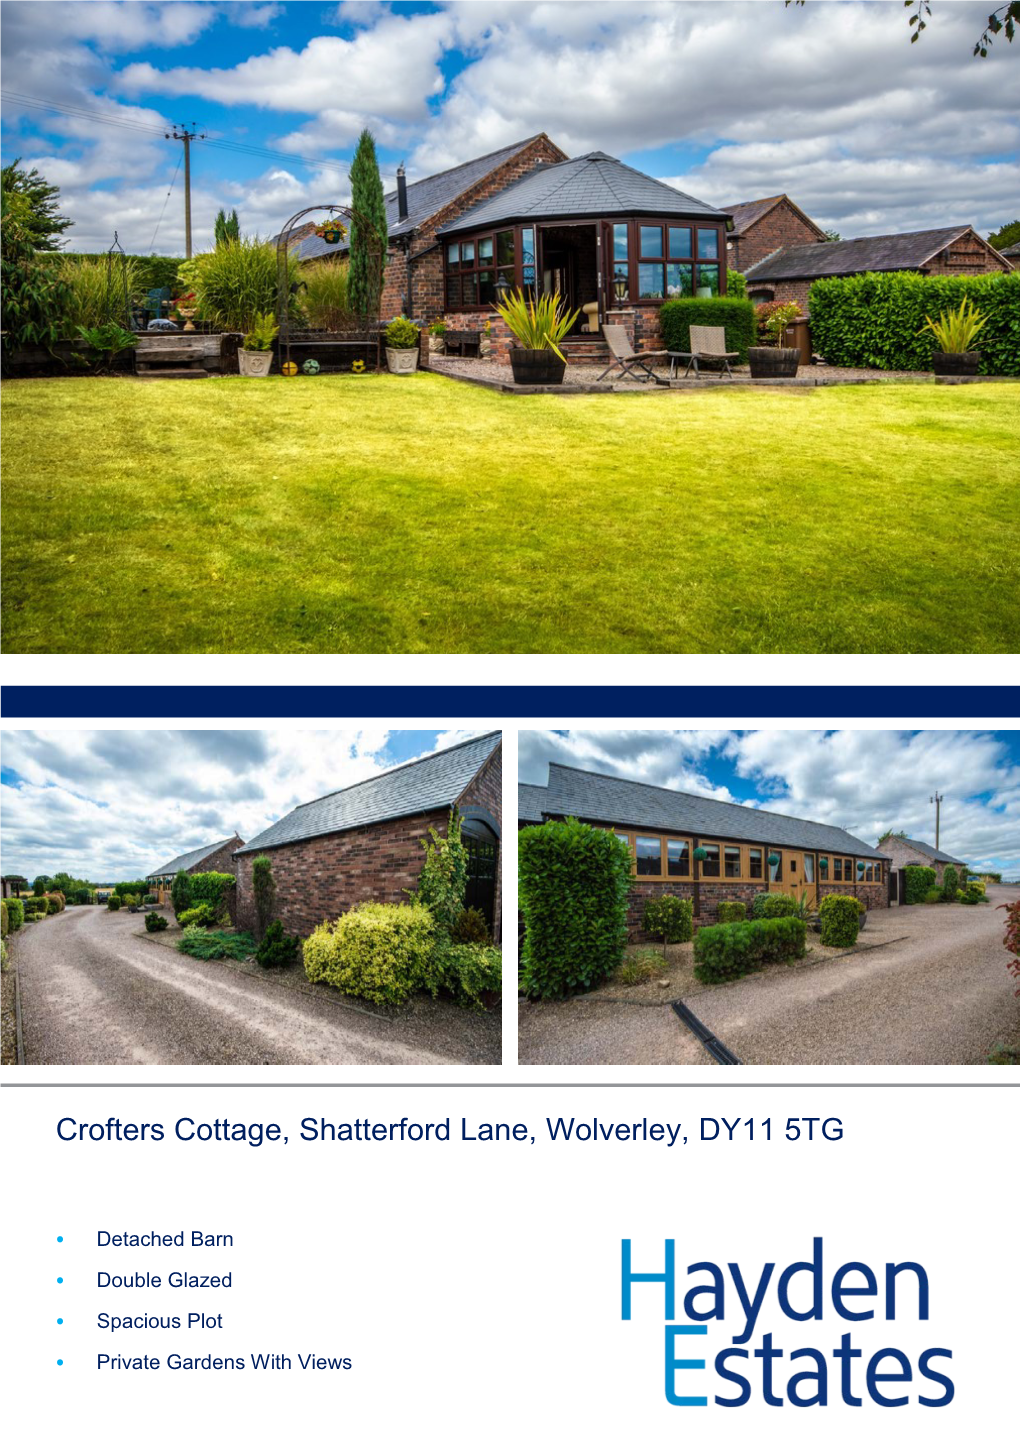 Crofters Cottage, Shatterford Lane, Wolverley, DY11 5TG